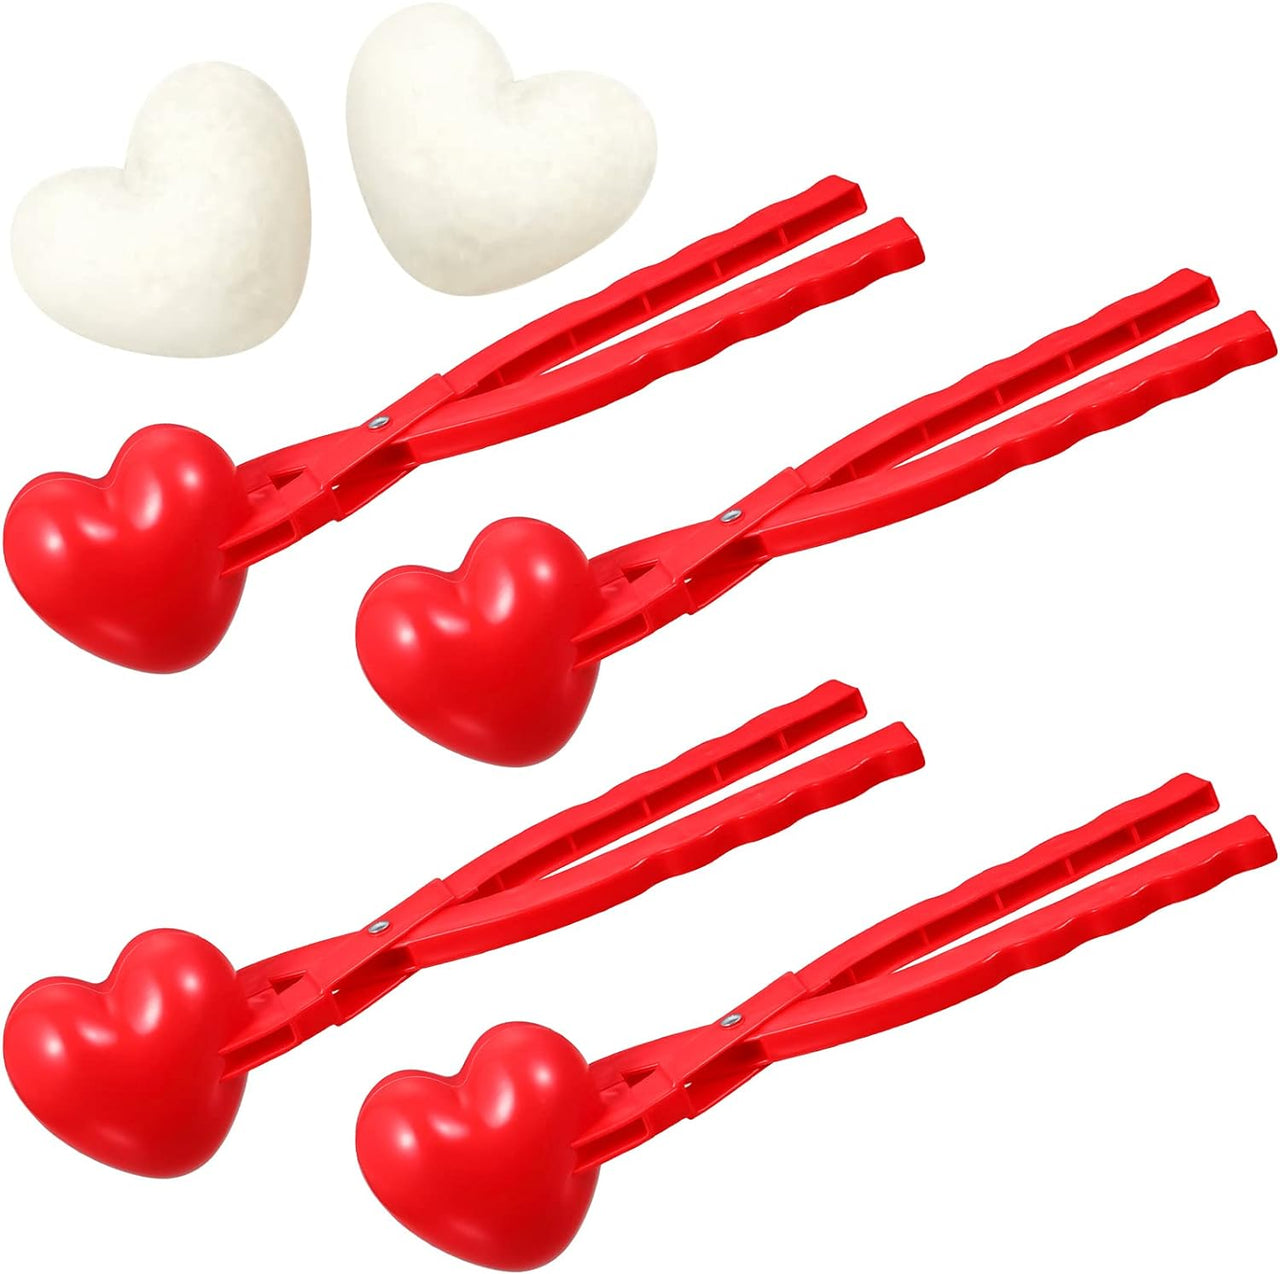 🌲 Early Christmas Sale - SAVE OFF 60% 🎁 Love Heart Snowball Maker